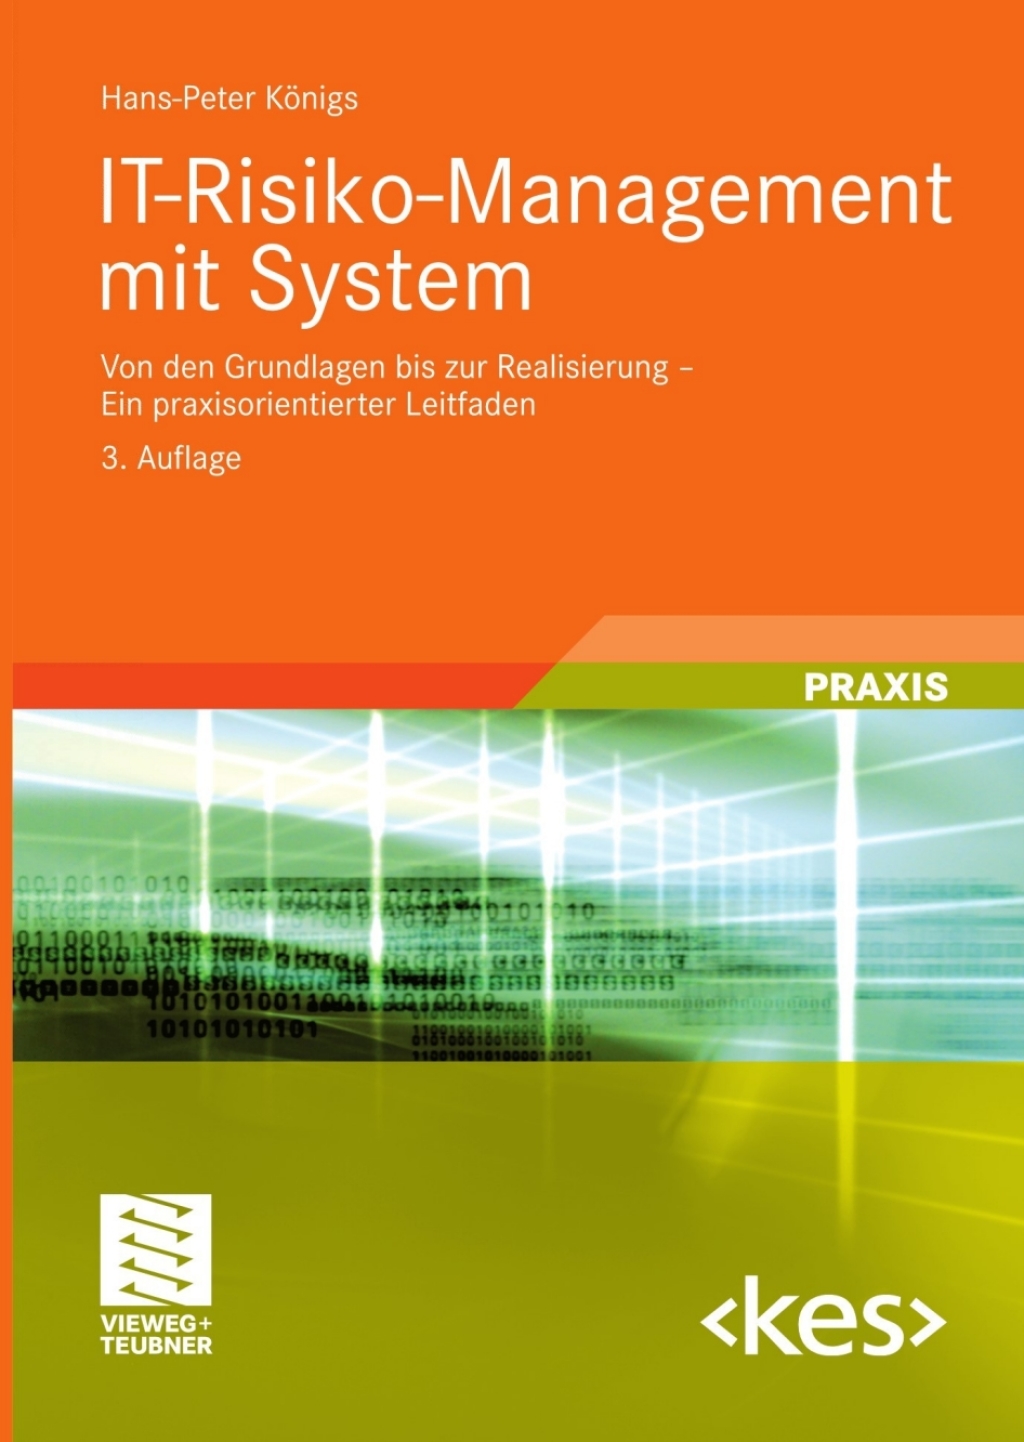 ISBN 9783834803597 product image for IT-Risiko-Management mit System - 3rd Edition (eBook Rental) | upcitemdb.com